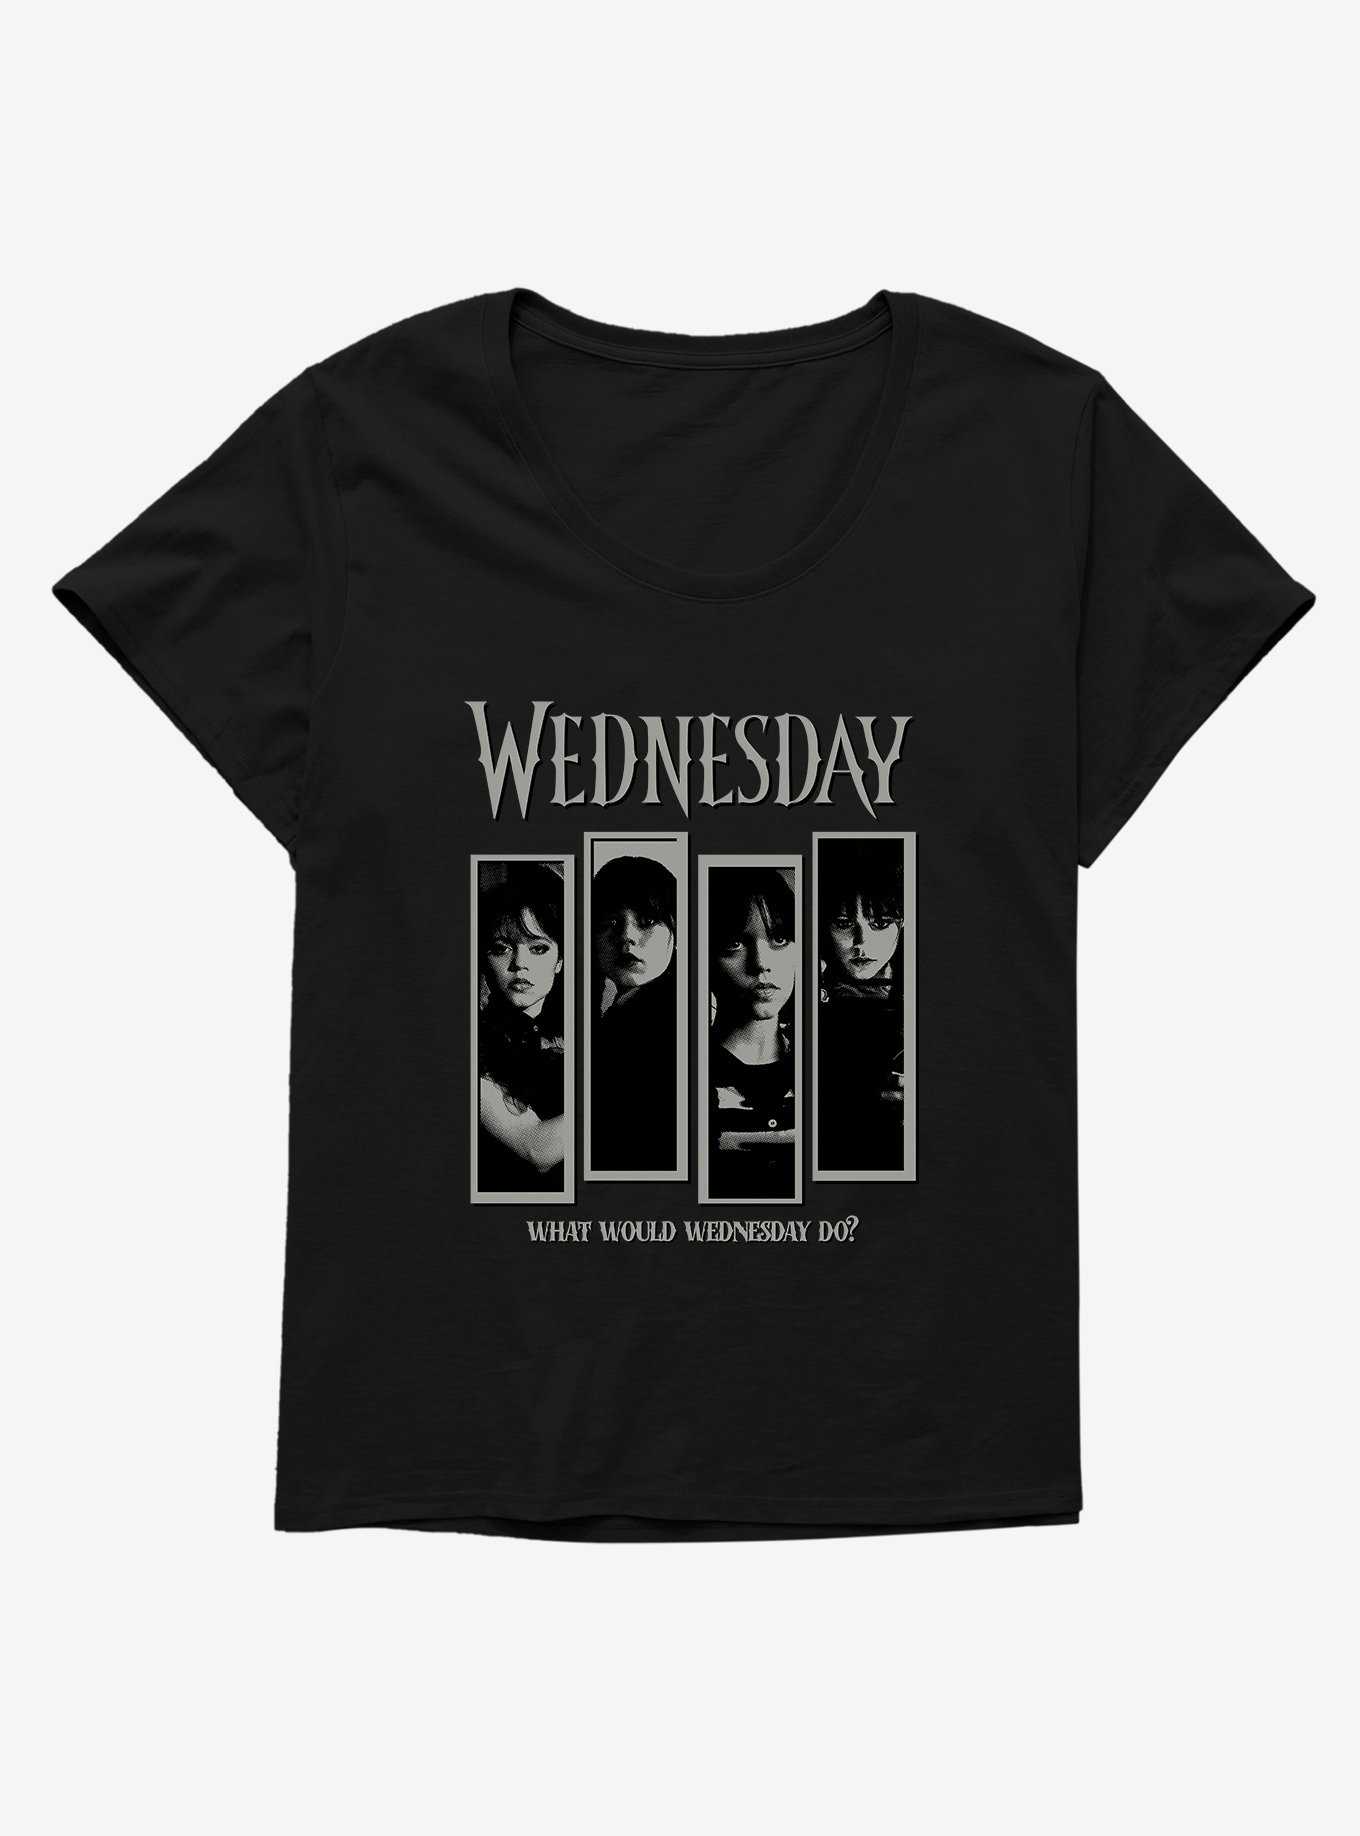 Wednesday What Would Wednesday Do? Panels Womens T-Shirt Plus Size, , hi-res